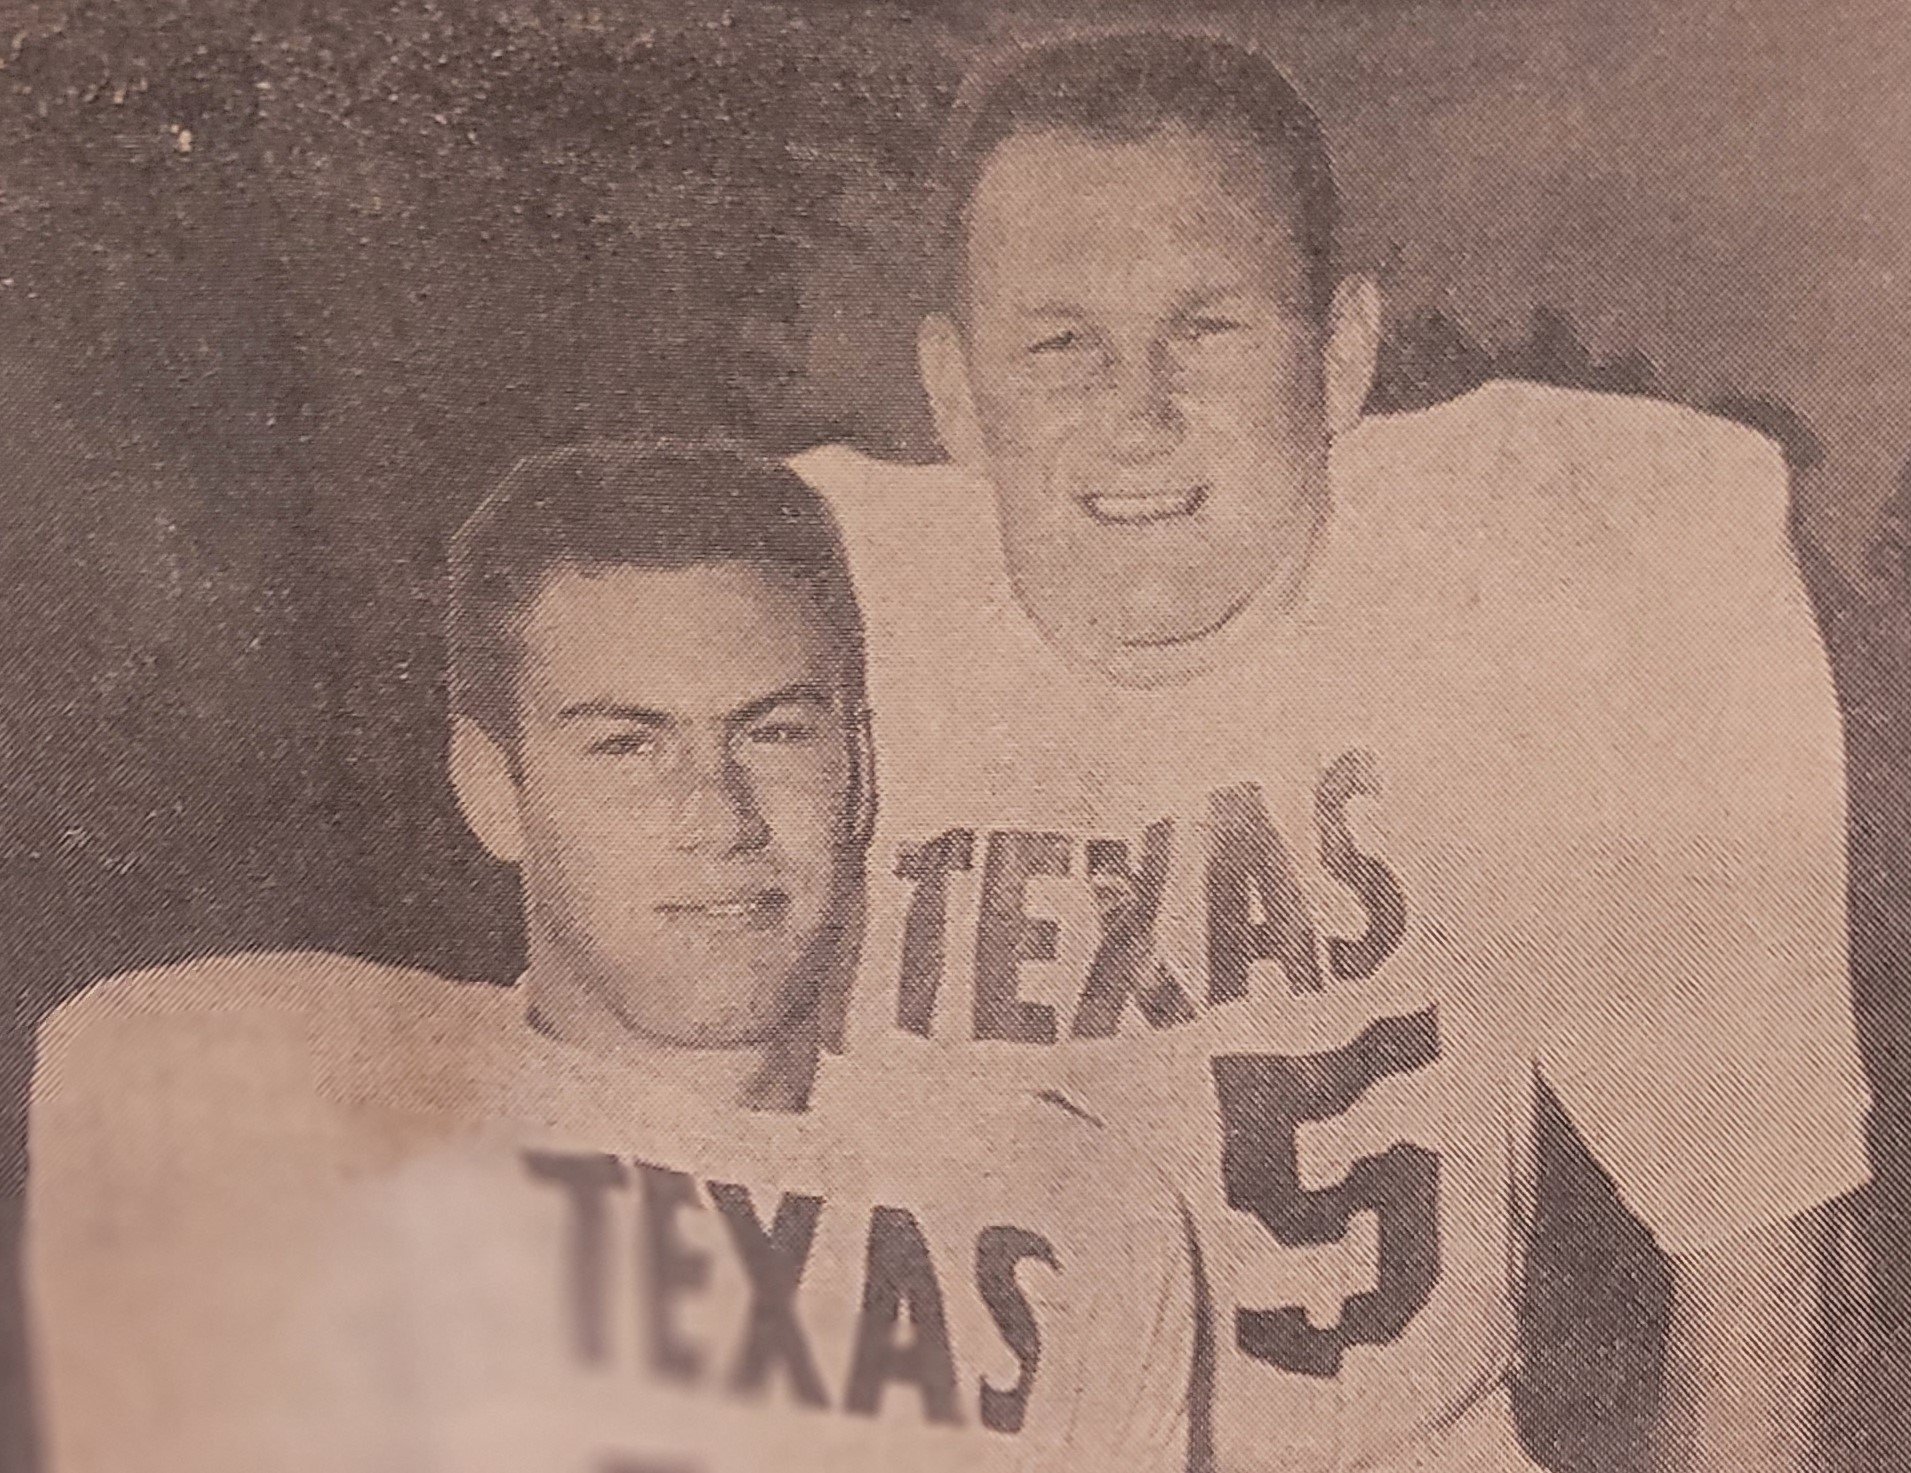 Phil Harris and Tommy Nobis